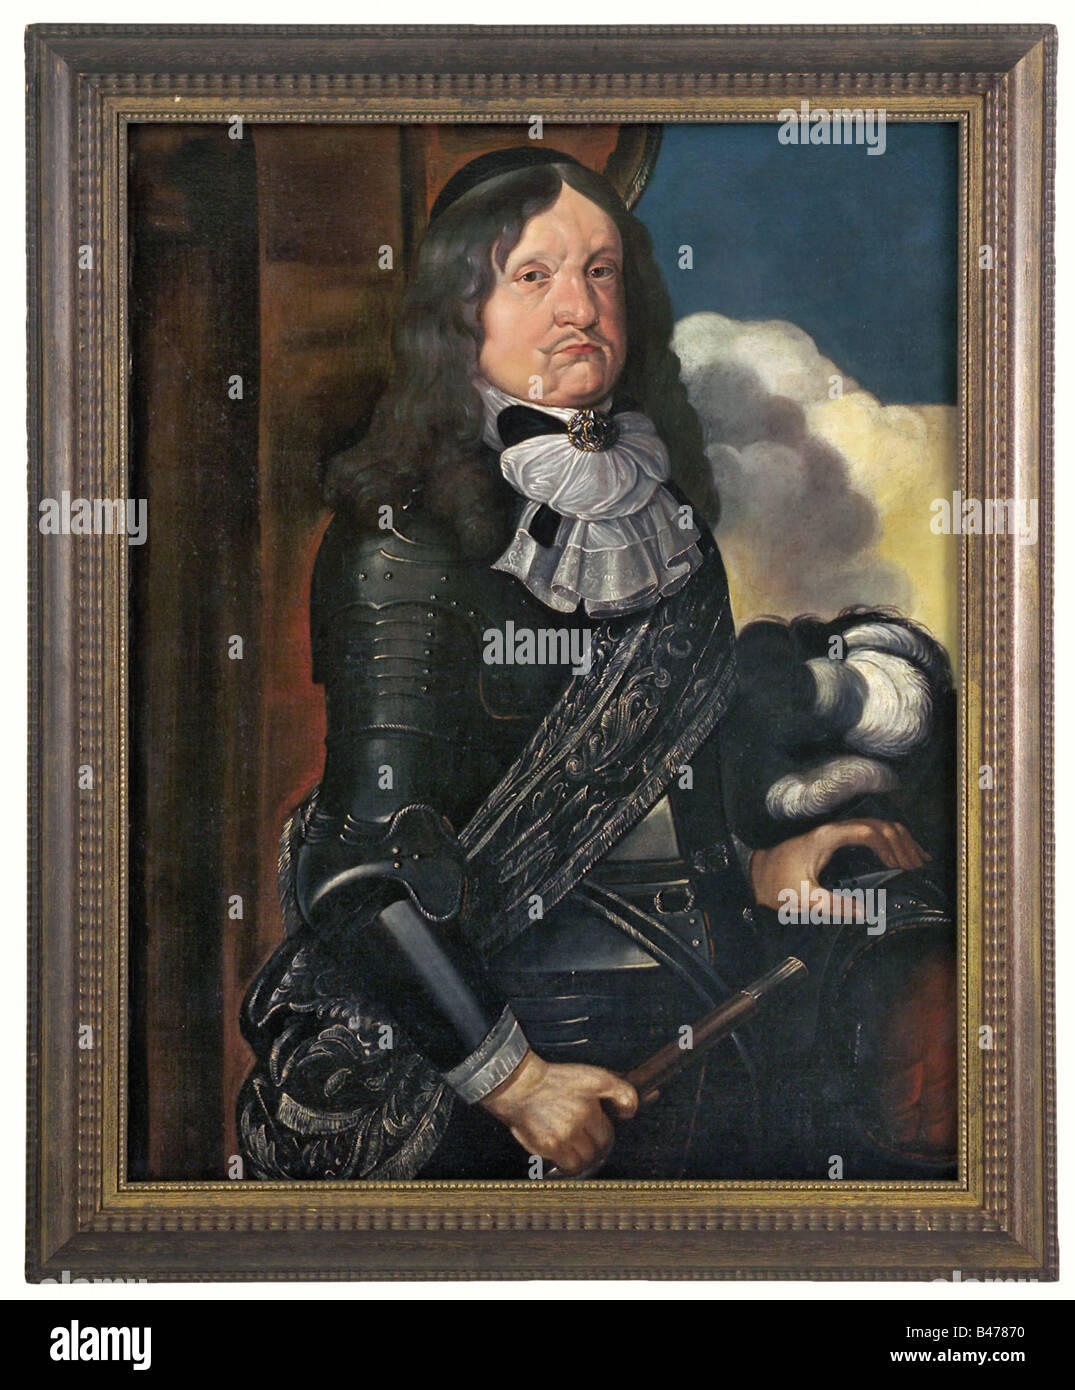 A portrait of a field marshal, Flemish, mid 17th century. Oil on canvas. Halfportrait of a baroque fieldmarshal in blackened Pappenheimer-armour. His gaze turned towards the beholder, his left hand resting on his helmet, a marshal's baton in his right. Silken scarf fastened by a brooch around the neck, a silver embroidered sash over his chest. Nested curtain in the background. Restored and relined on canvas. In wooden frame. Measurements of painting 80 x 63 cm, framed 94 x 77 cm. fine arts, people, 17th century, fine arts, art, painting, paintings, ob, Artist's Copyright has not to be cleared Stock Photo